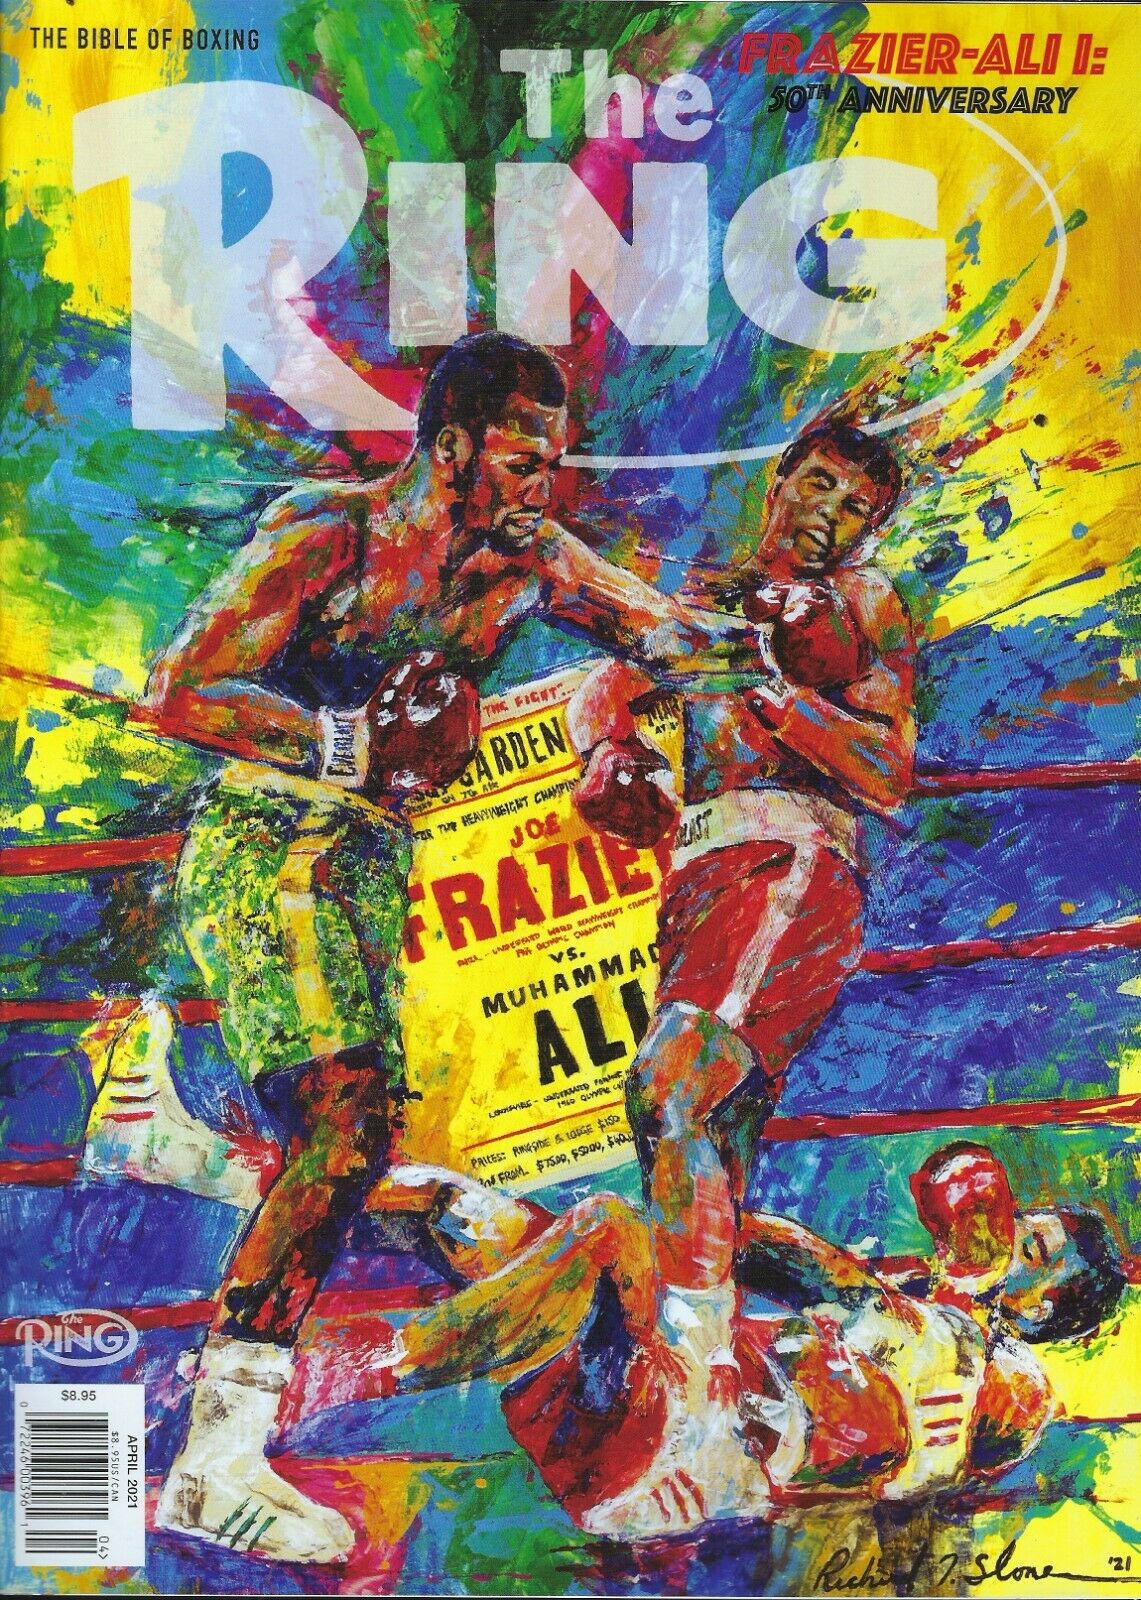 Ring, The April 2021 magazine back issue Ring, The magizine back copy Ring, The April 2021 American boxing magazine back issue first published in 1922 by Sports & Entertainment Publications.  The Bible Of Boxing .